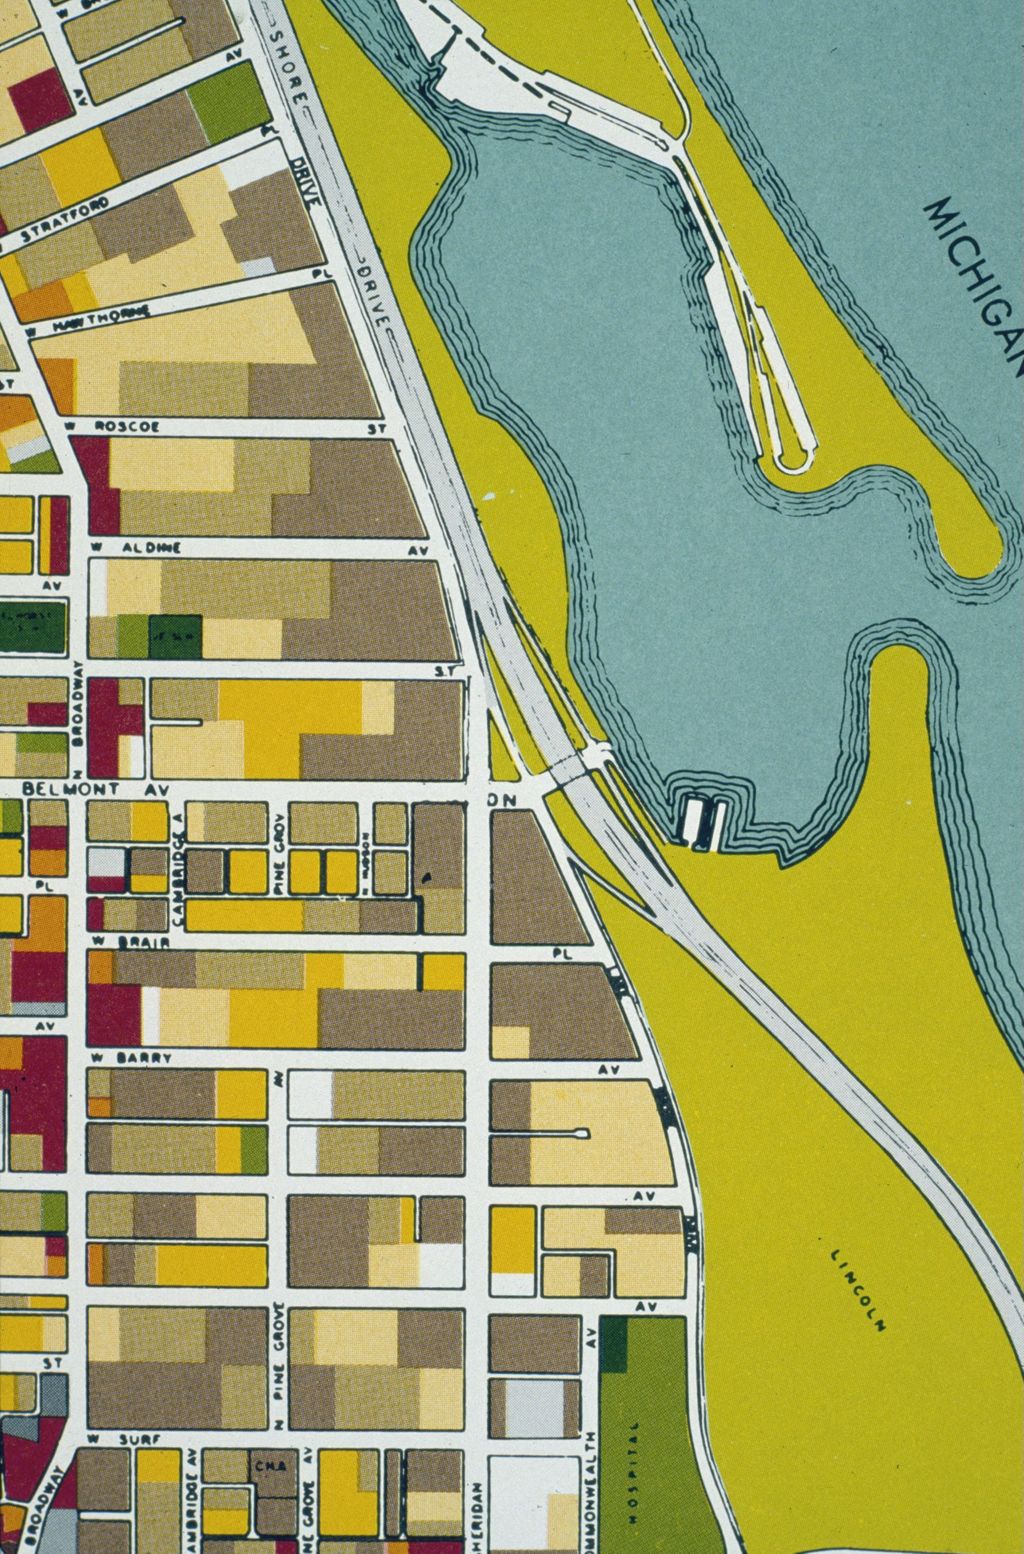 Miniature of Land use along the lakefront near Lincoln Park